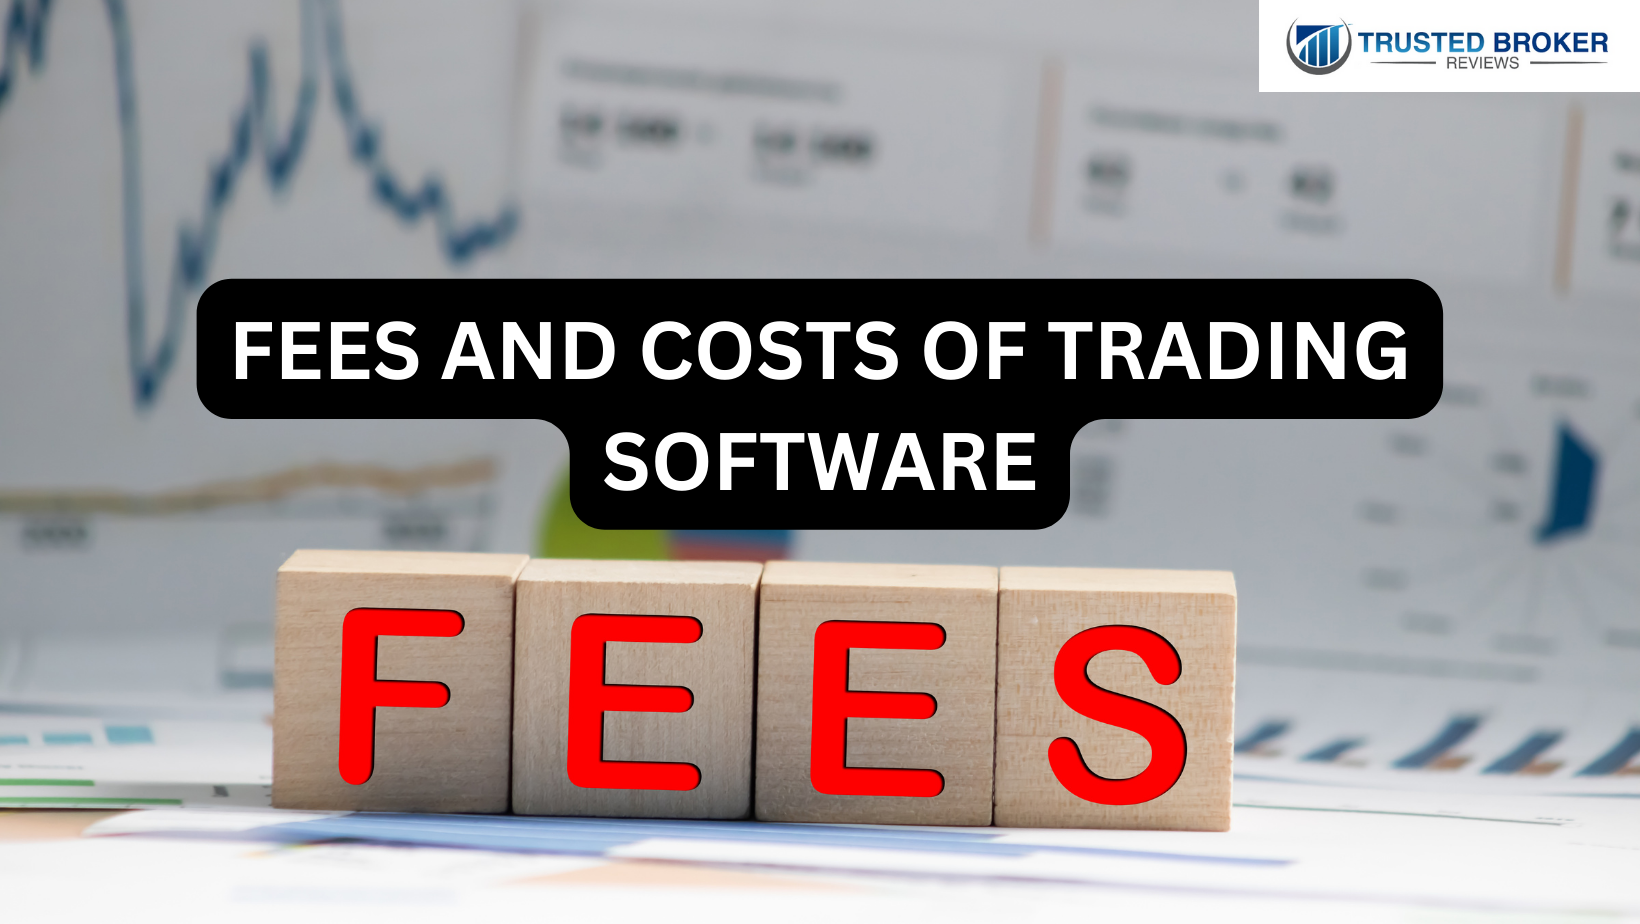 Fees and costs of trading software